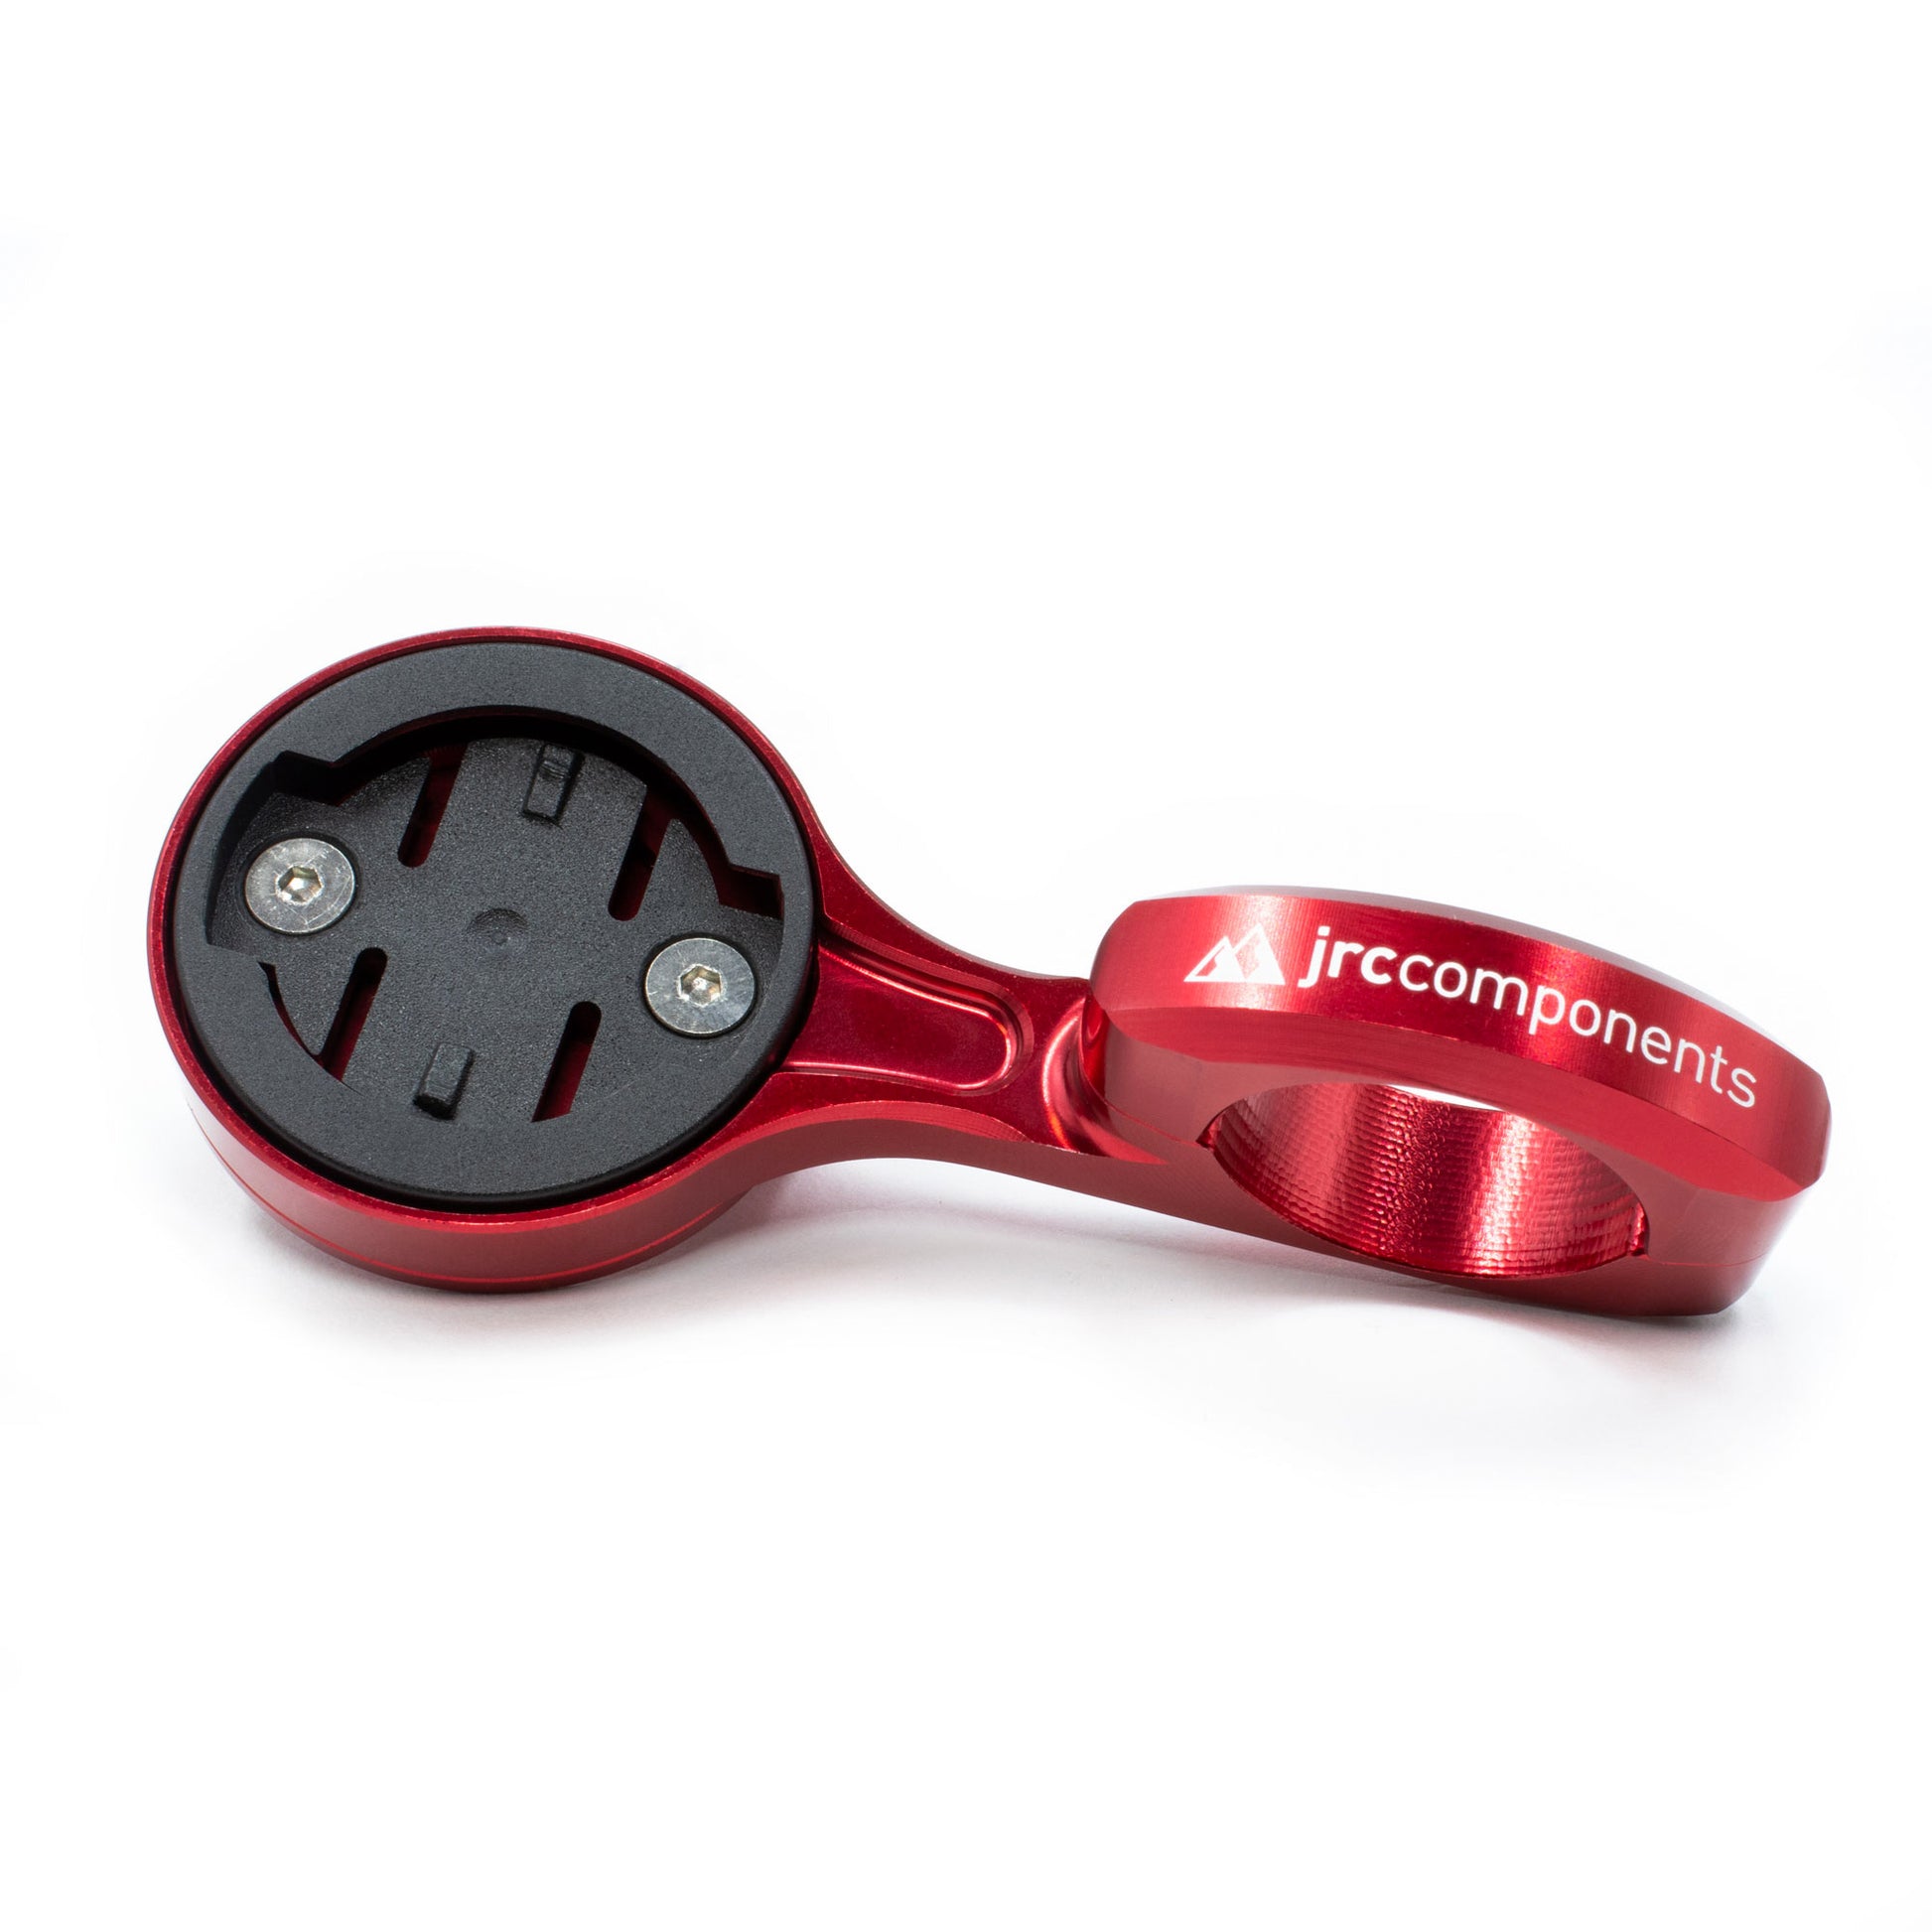 Red, lightweight, aluminium Wahoo GPS computer mount for Time Trial and Triathlons, TT, with compact flick-switch design